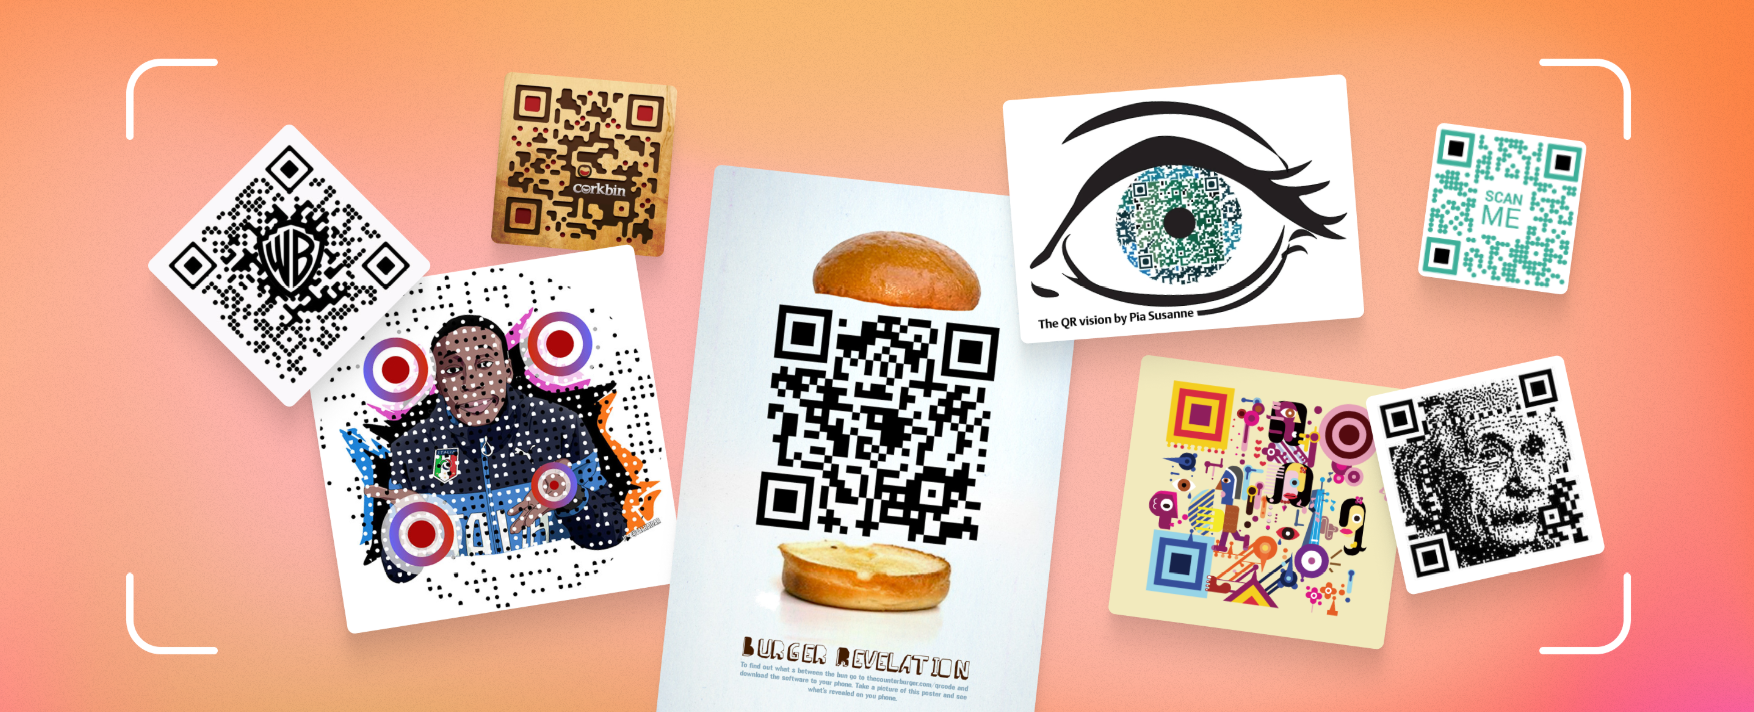 How to create QR codes that people would want to scan - blog.icons8.com